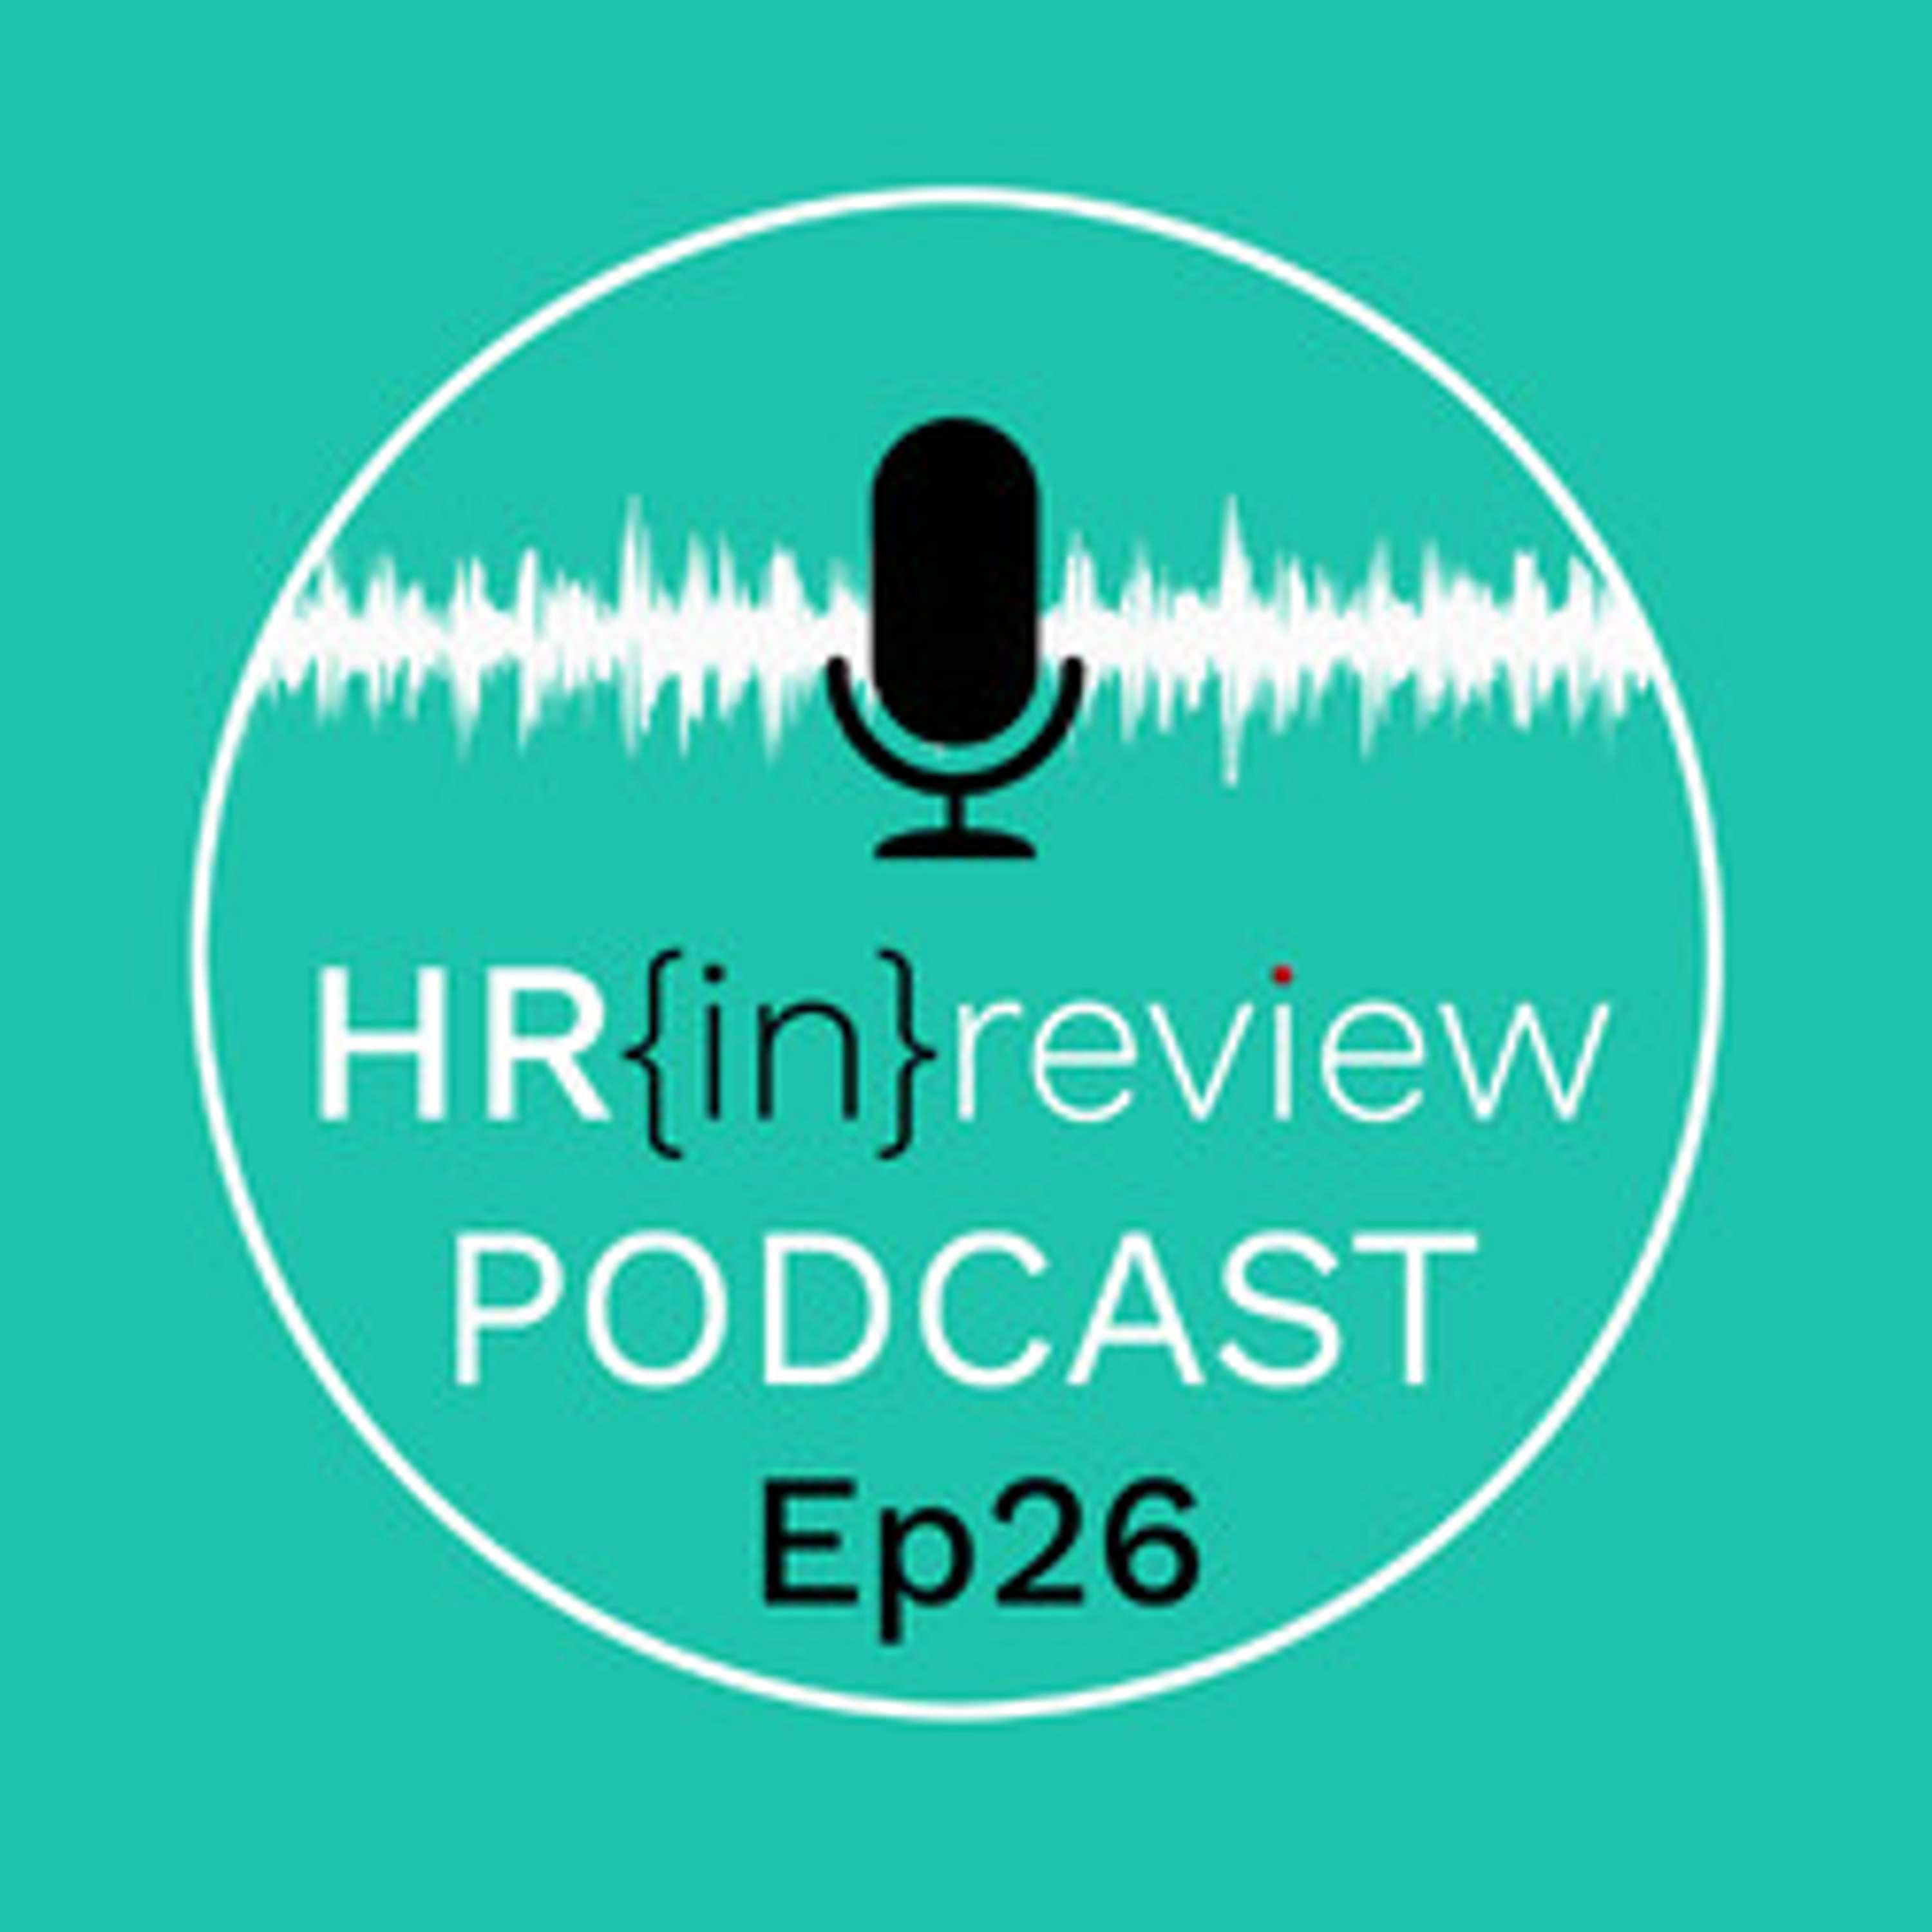 Getting More From Employee Benefits with Roger Thorpe